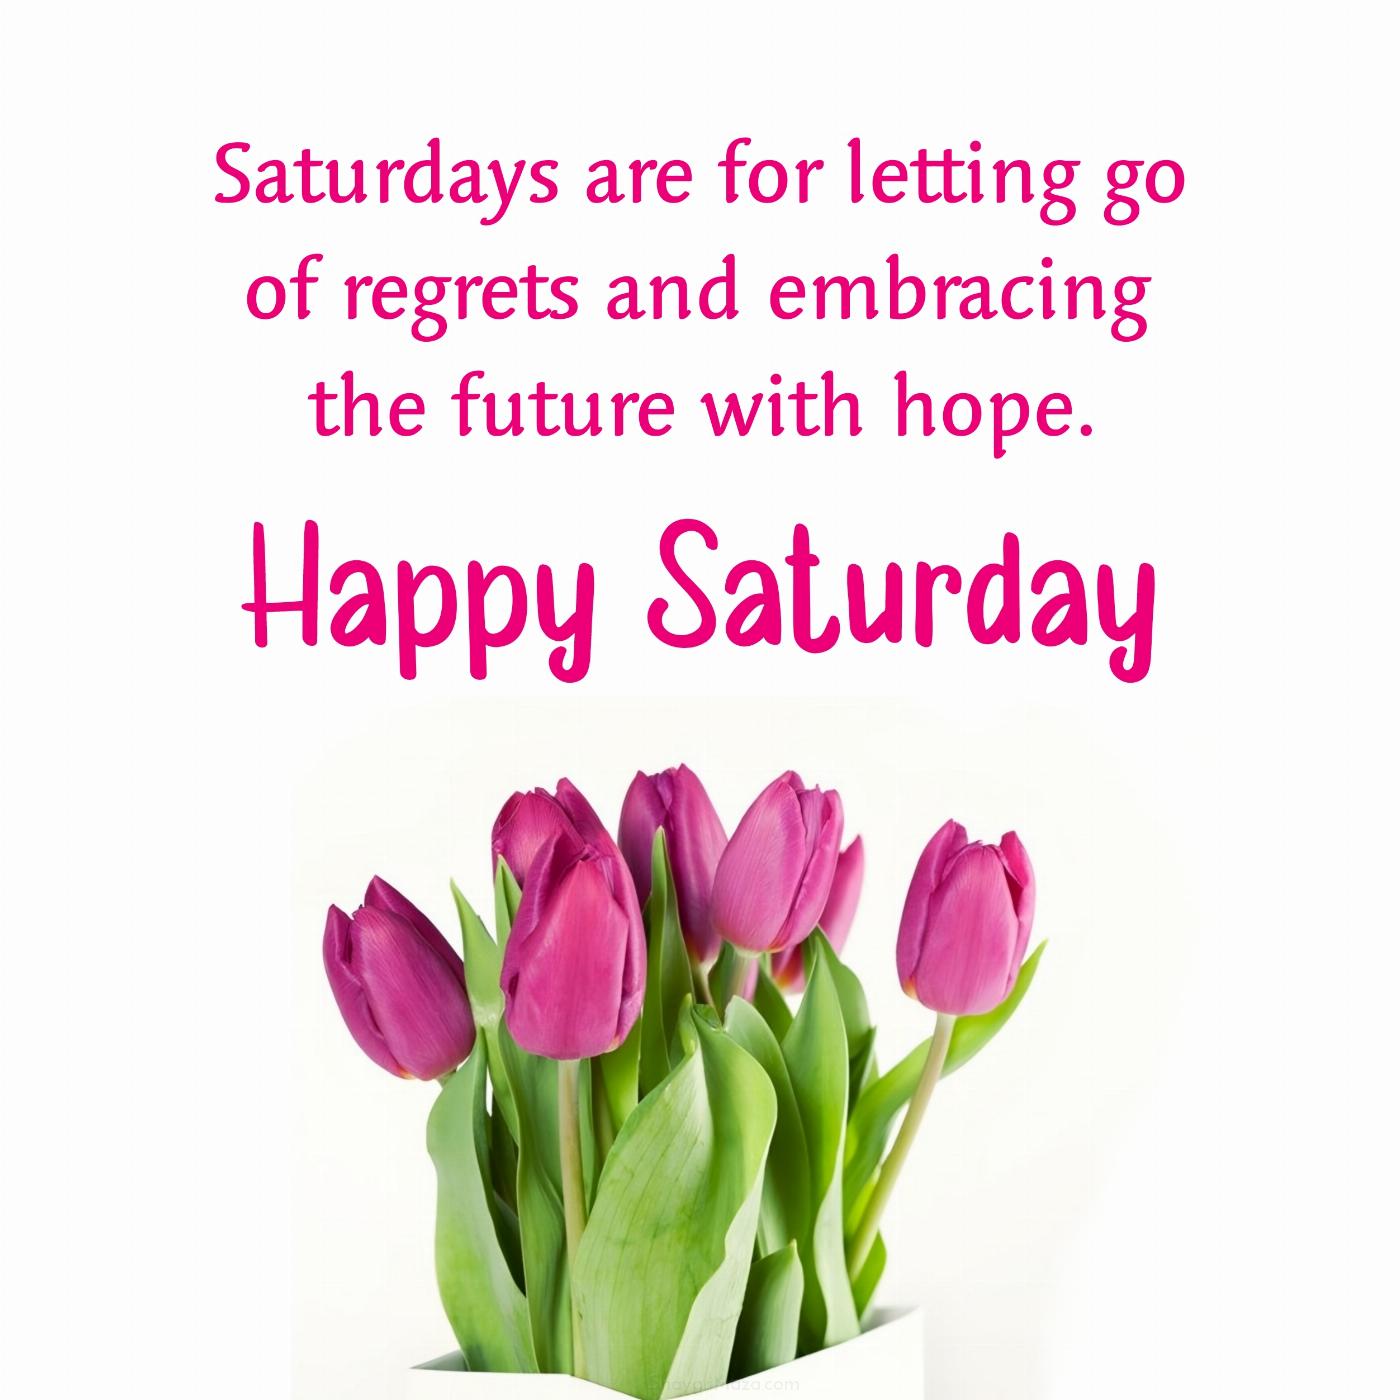 Saturdays are for letting go of regrets and embracing the future